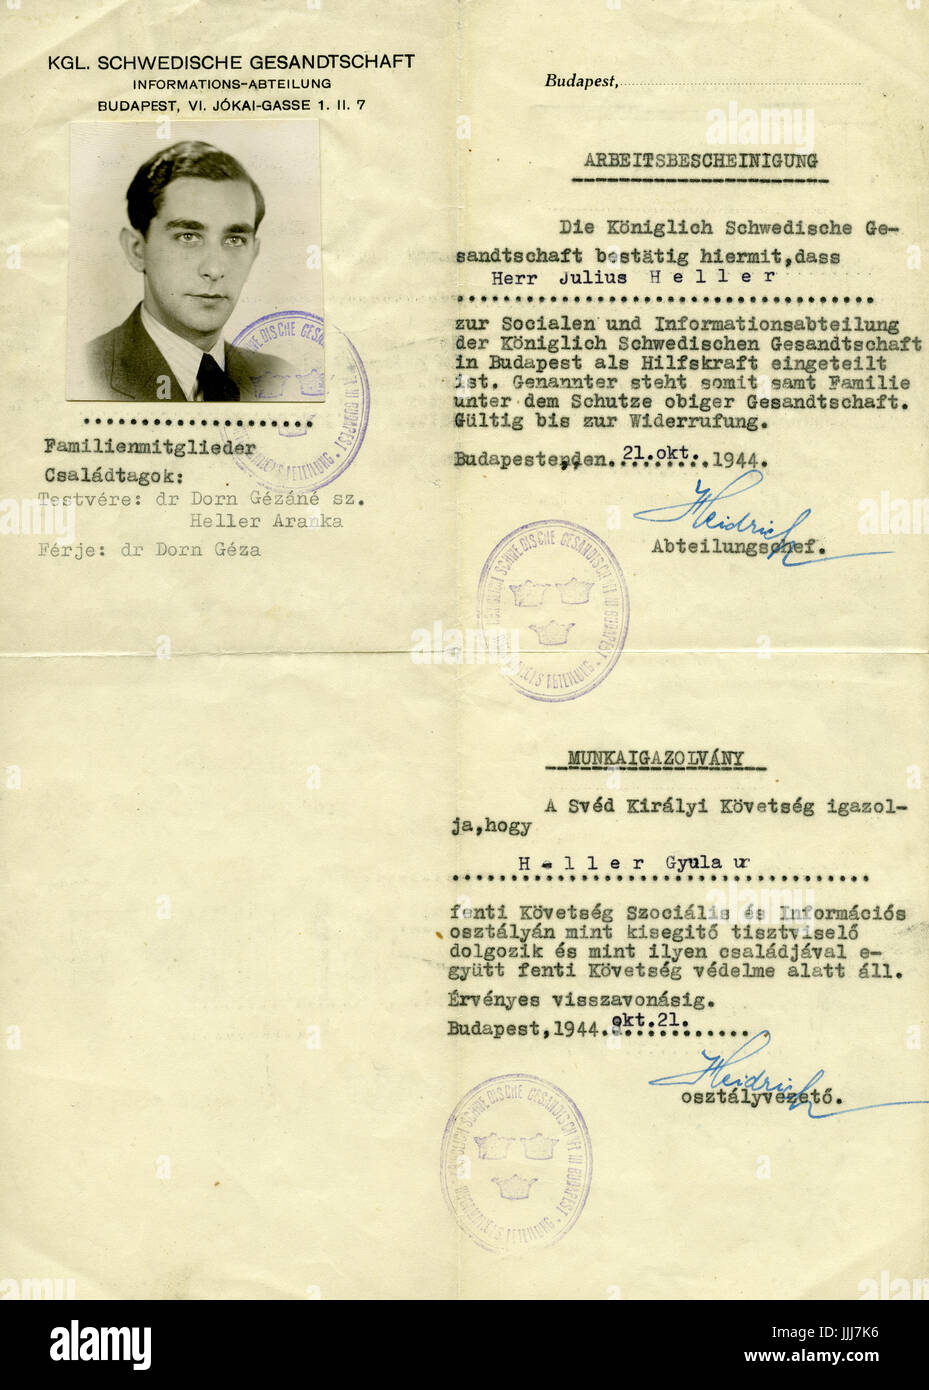 Arbeitsbescheinigung / Work pass of Julius Heller, confirming a job at the Swedish embassy in Budapest. Protective document issued as a result of intervention by Raoul Wallenberg, special envoy of Sweden in Budapest, sheltering Jews on neutral Swedish territory in Nazi-occupied Hungary. See also Schutzpass issued to Julius Heller Stock Photo